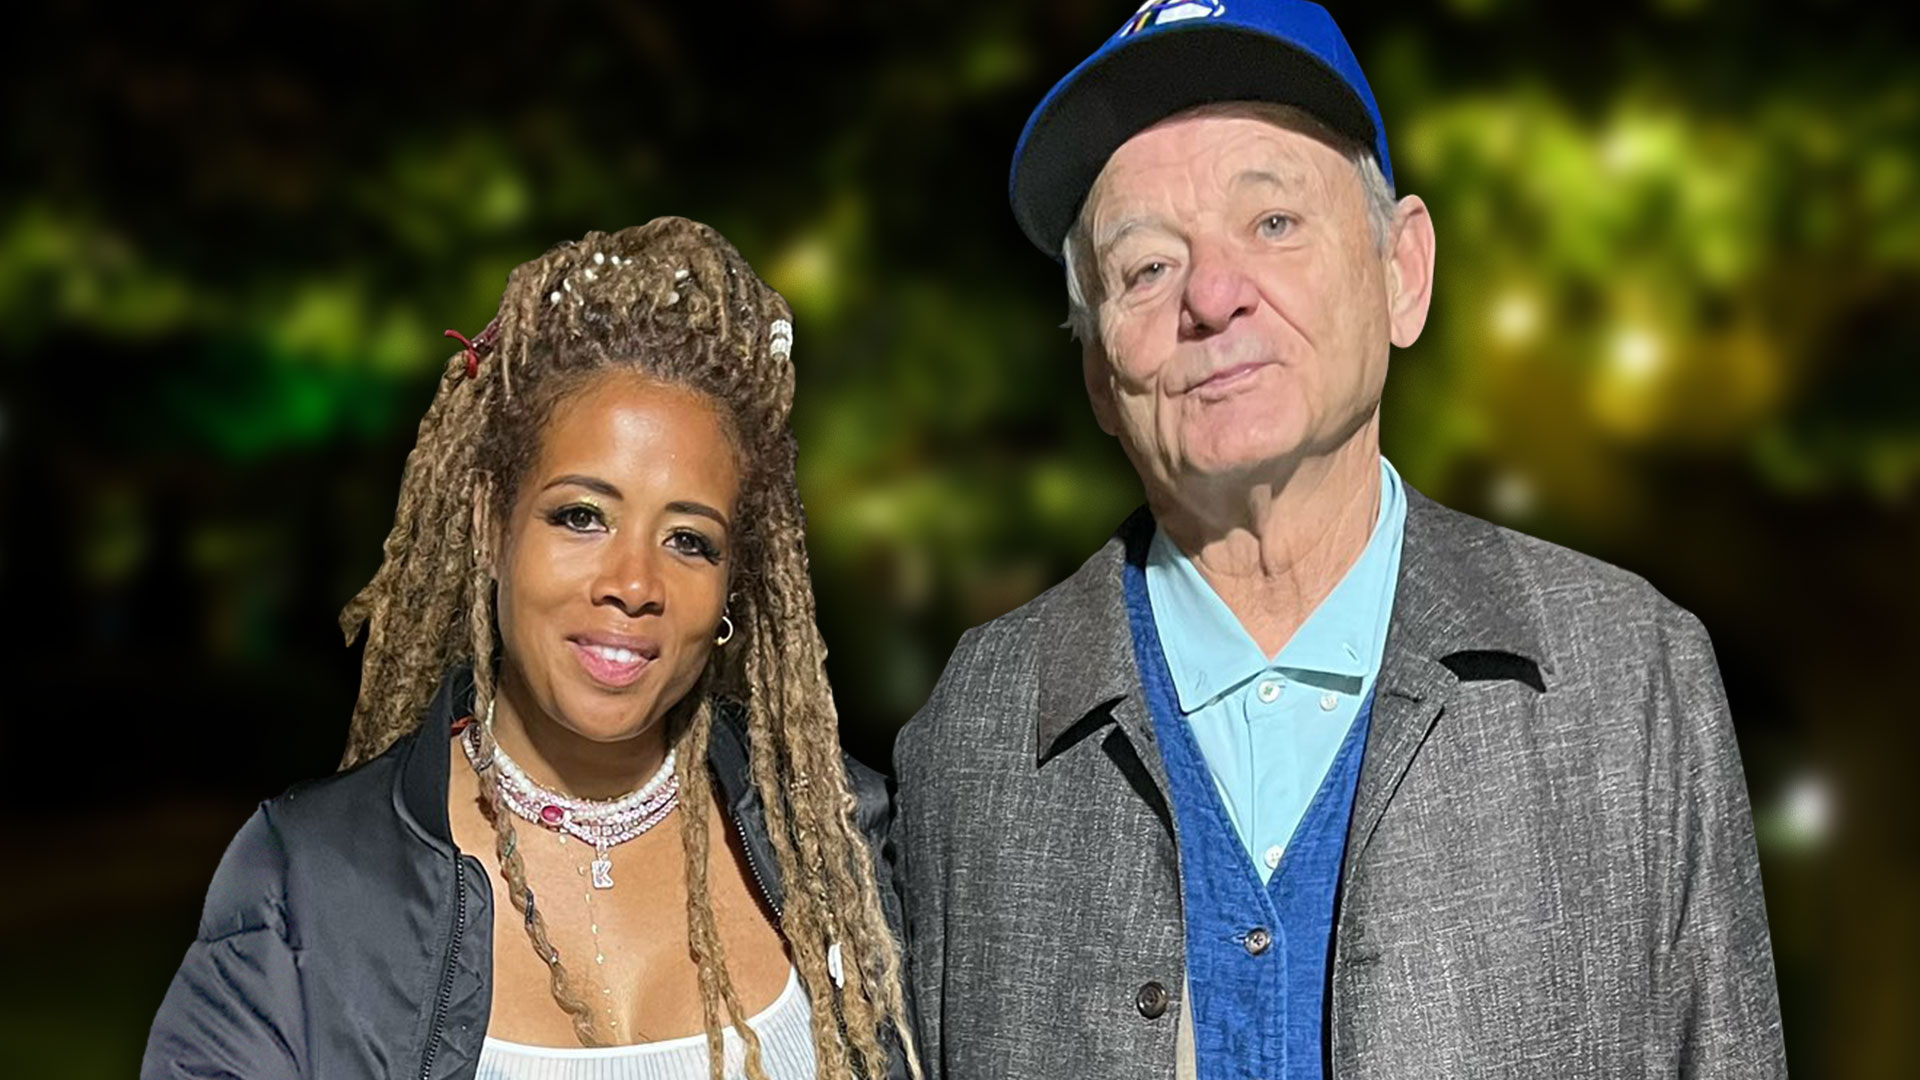 Bill Murray, 72, Dating Kelis, 43: An Unlikely Romance Sparks Up Between the Two! 17